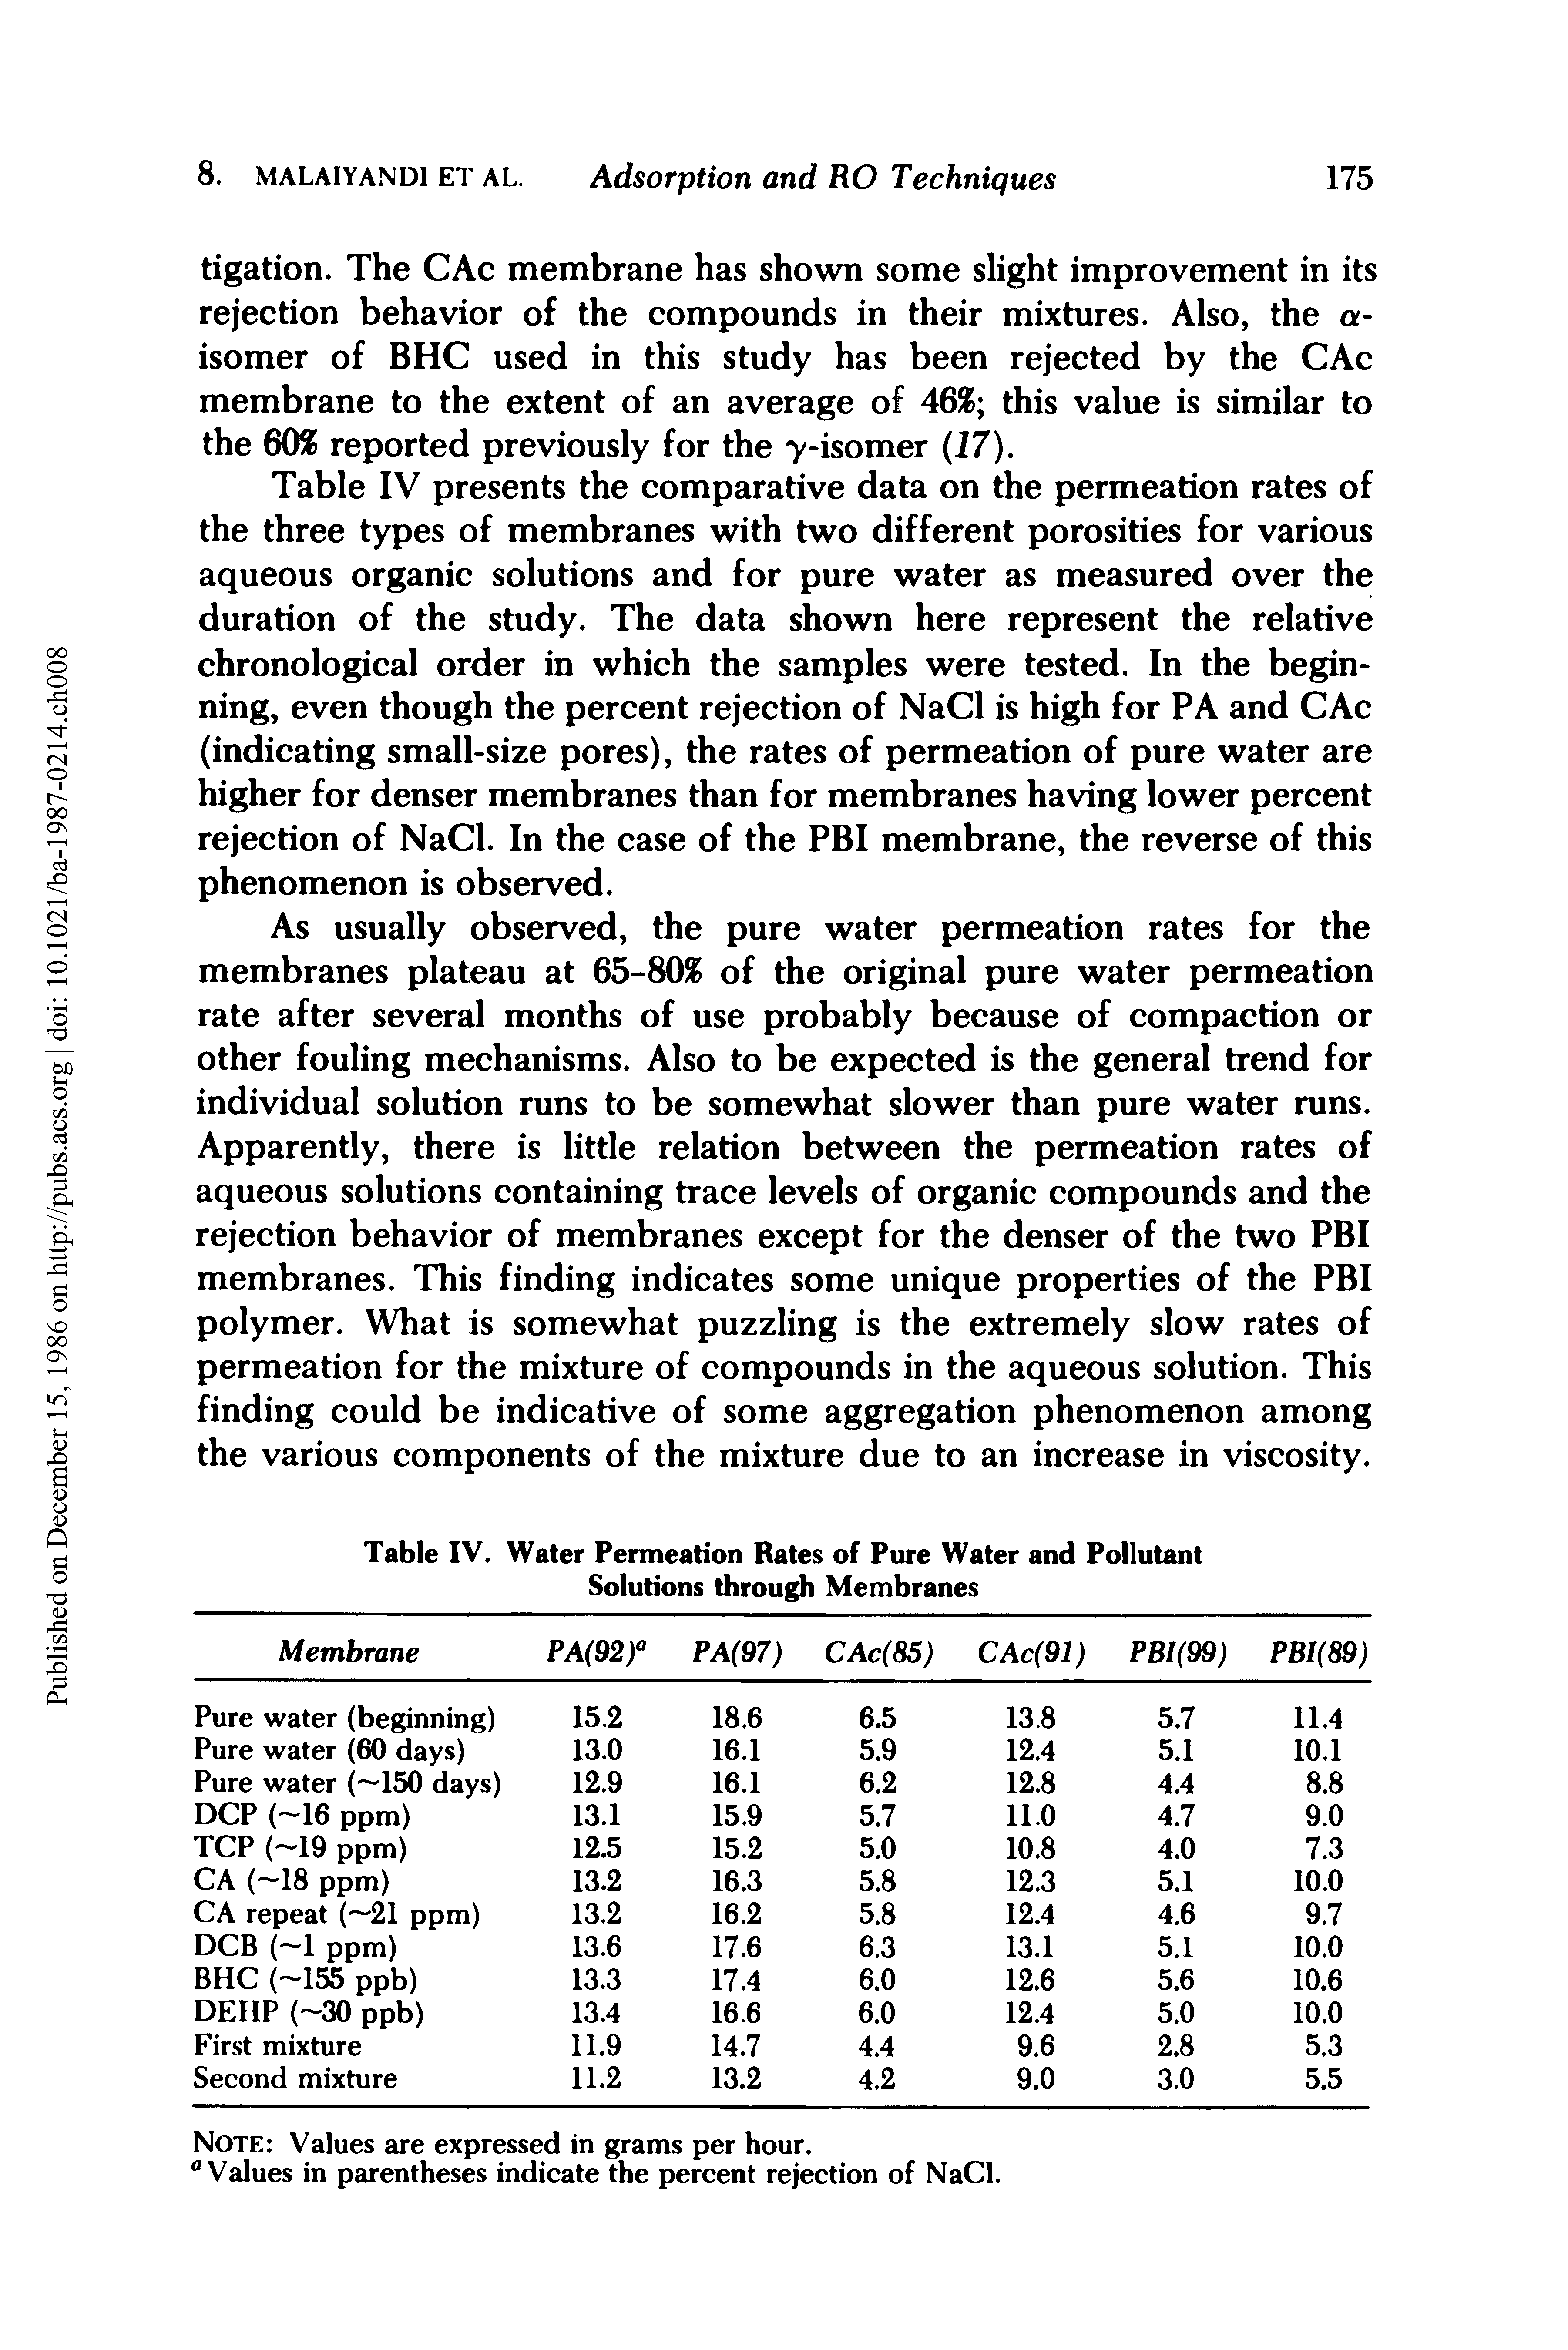 Table IV presents the comparative data on the permeation rates of the three types of membranes with two different porosities for various aqueous organic solutions and for pure water as measured over the duration of the study. The data shown here represent the relative chronological order in which the samples were tested. In the beginning, even though the percent rejection of NaCl is high for PA and CAc (indicating small-size pores), the rates of permeation of pure water are higher for denser membranes than for membranes having lower percent rejection of NaCl. In the case of the PBI membrane, the reverse of this phenomenon is observed.